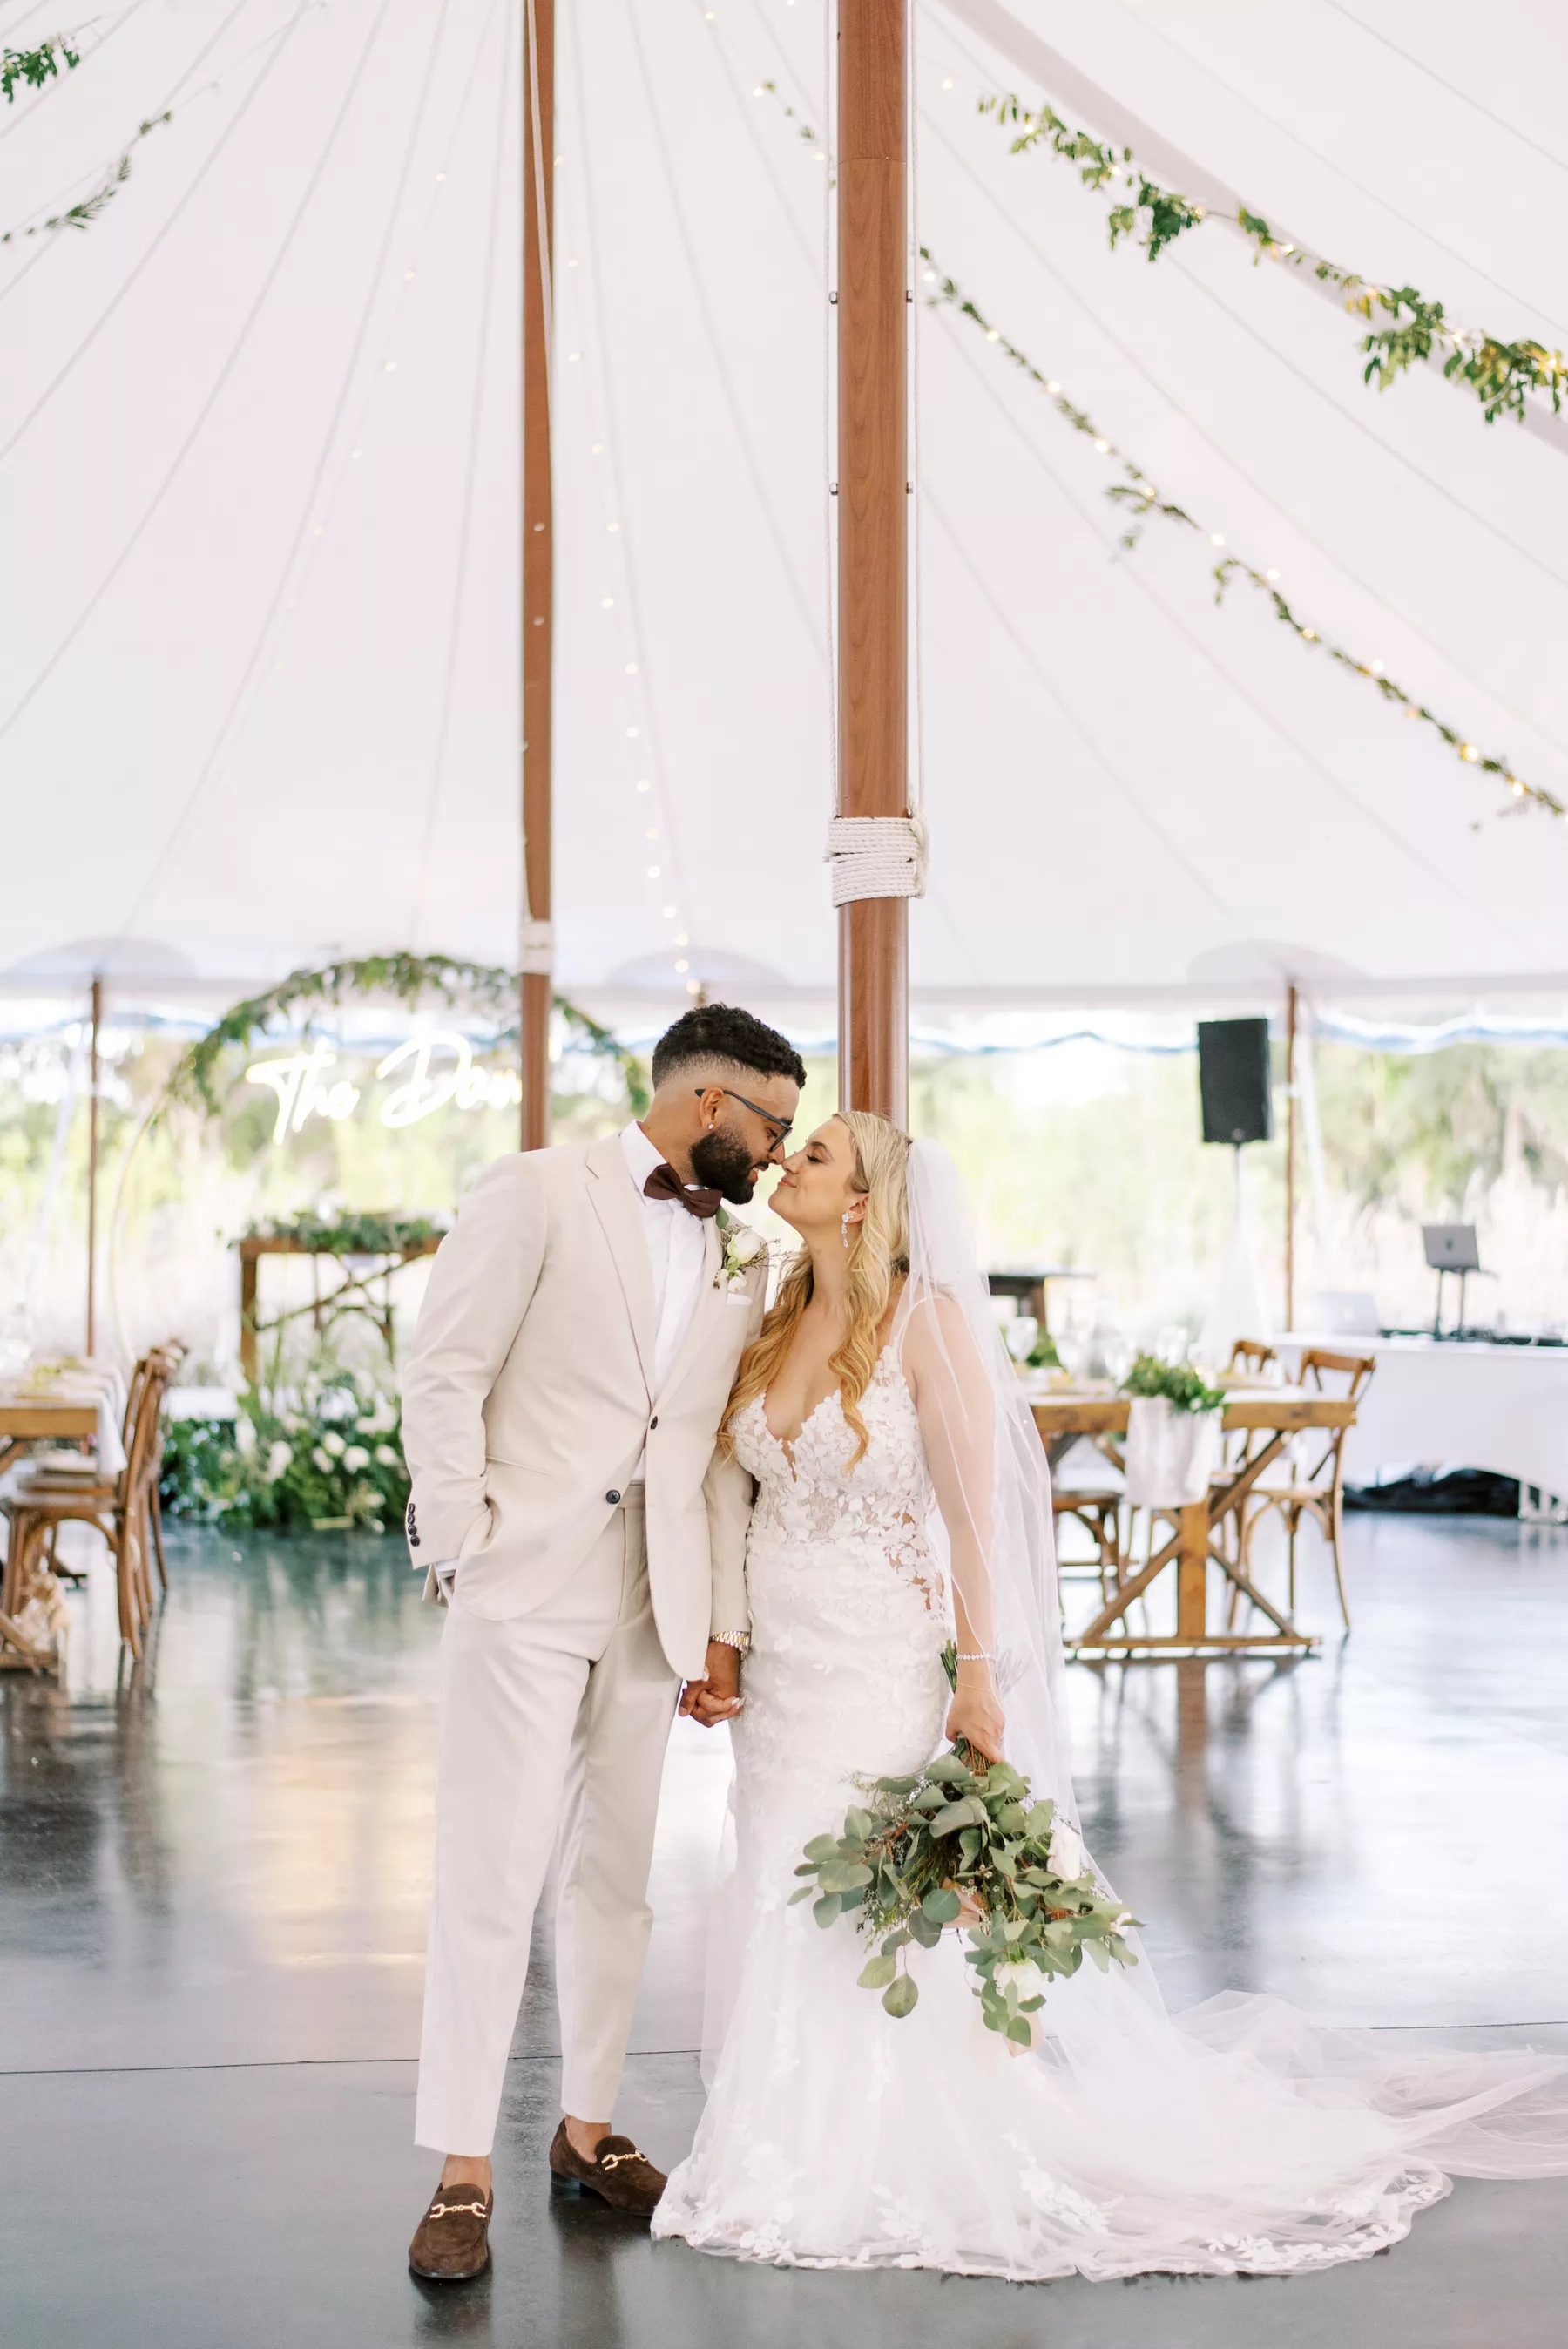 Romantic Green and White Tented Outdoor Wedding Reception Ideas | Outdoor Tampa Venue Mill Pond Estate